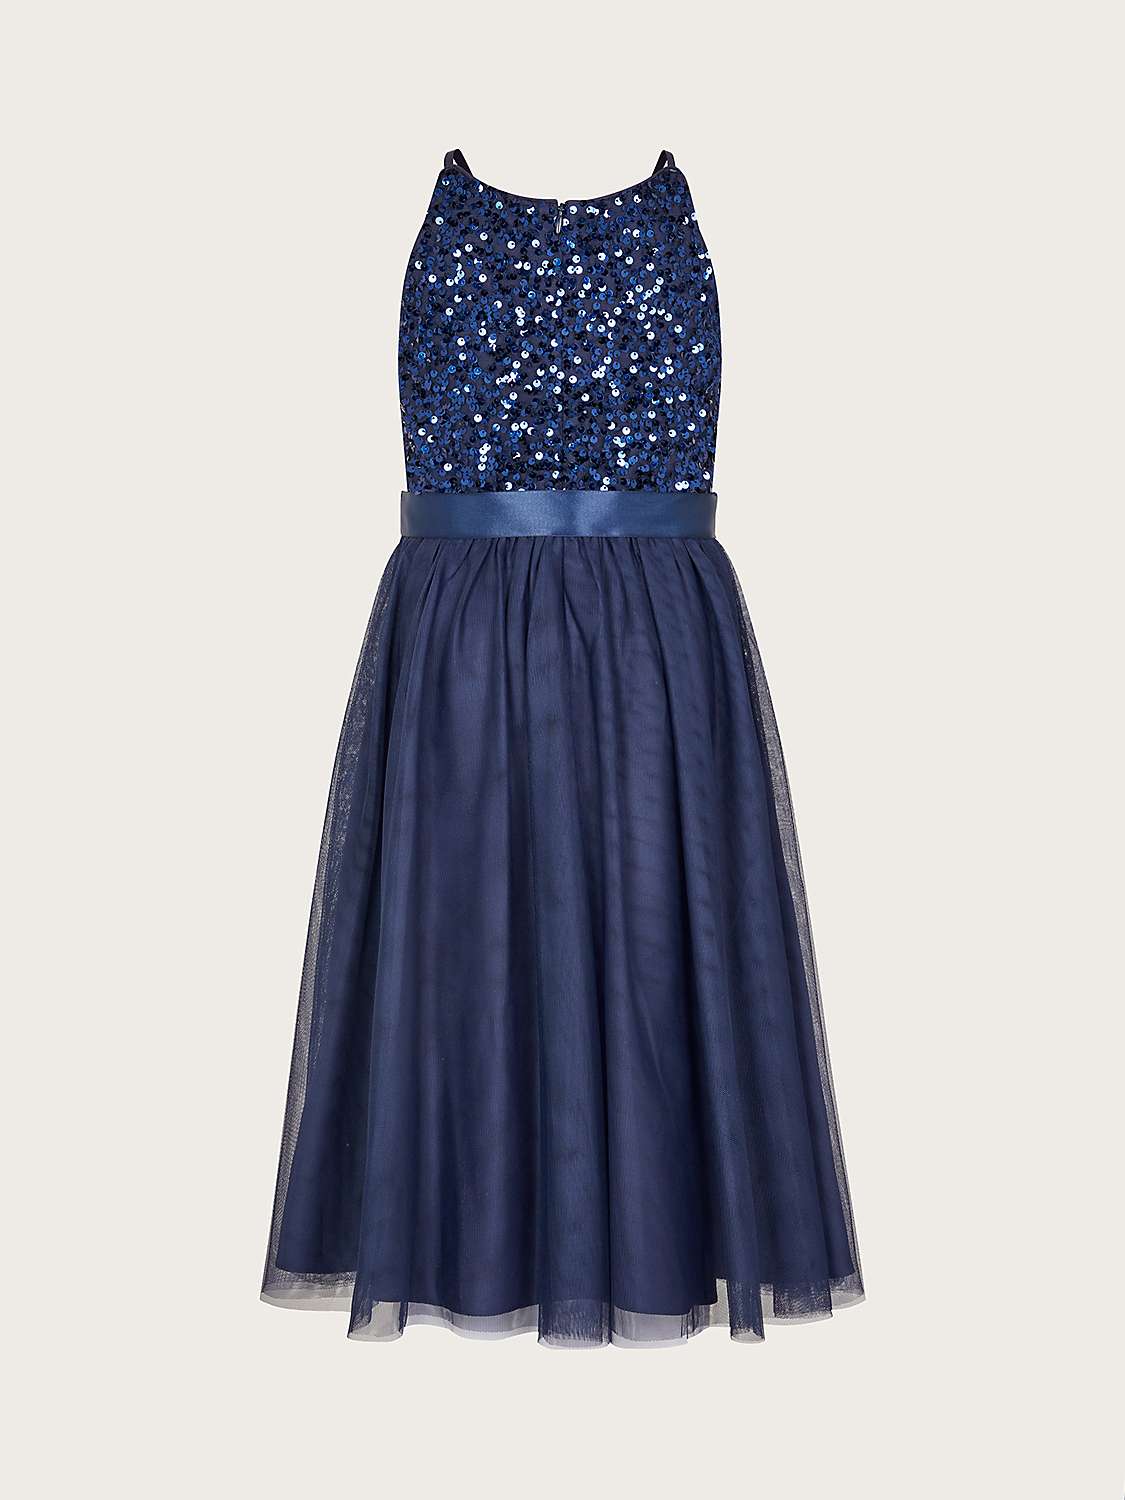 Buy Monsoon Kids' Truth Sequin Occasion Dress, Navy Online at johnlewis.com